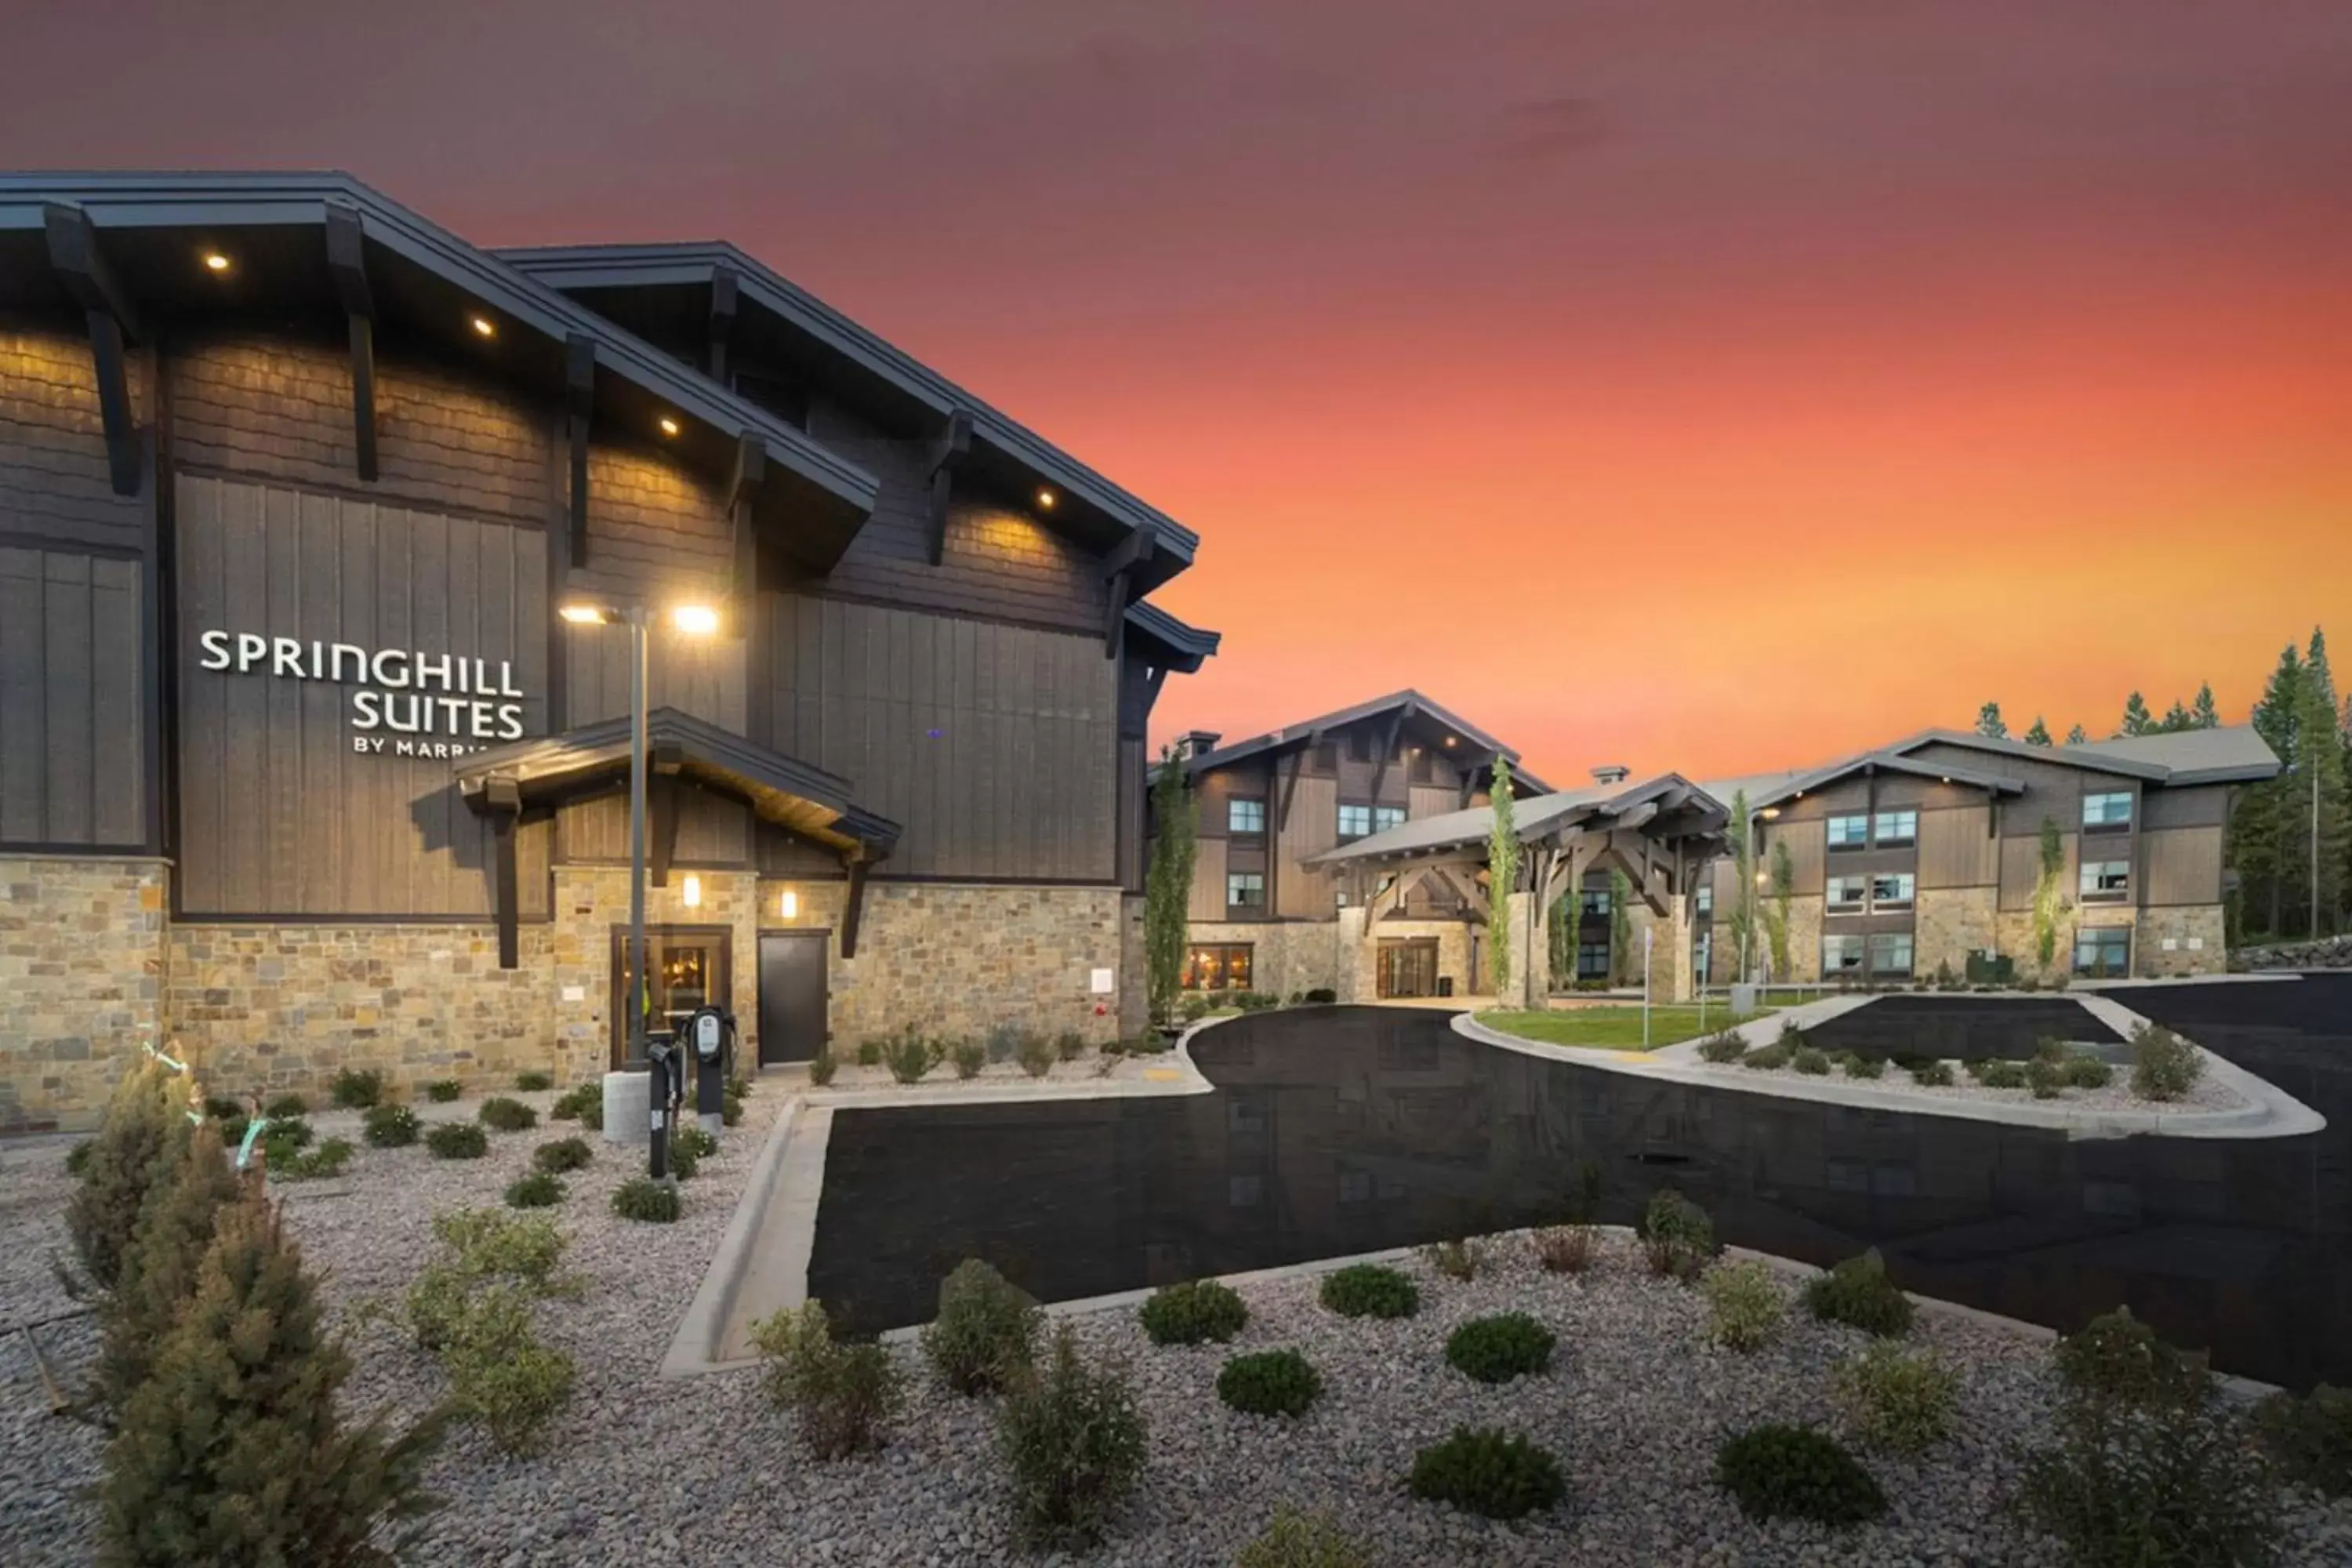 Property Building in SpringHill Suites Island Park Yellowstone